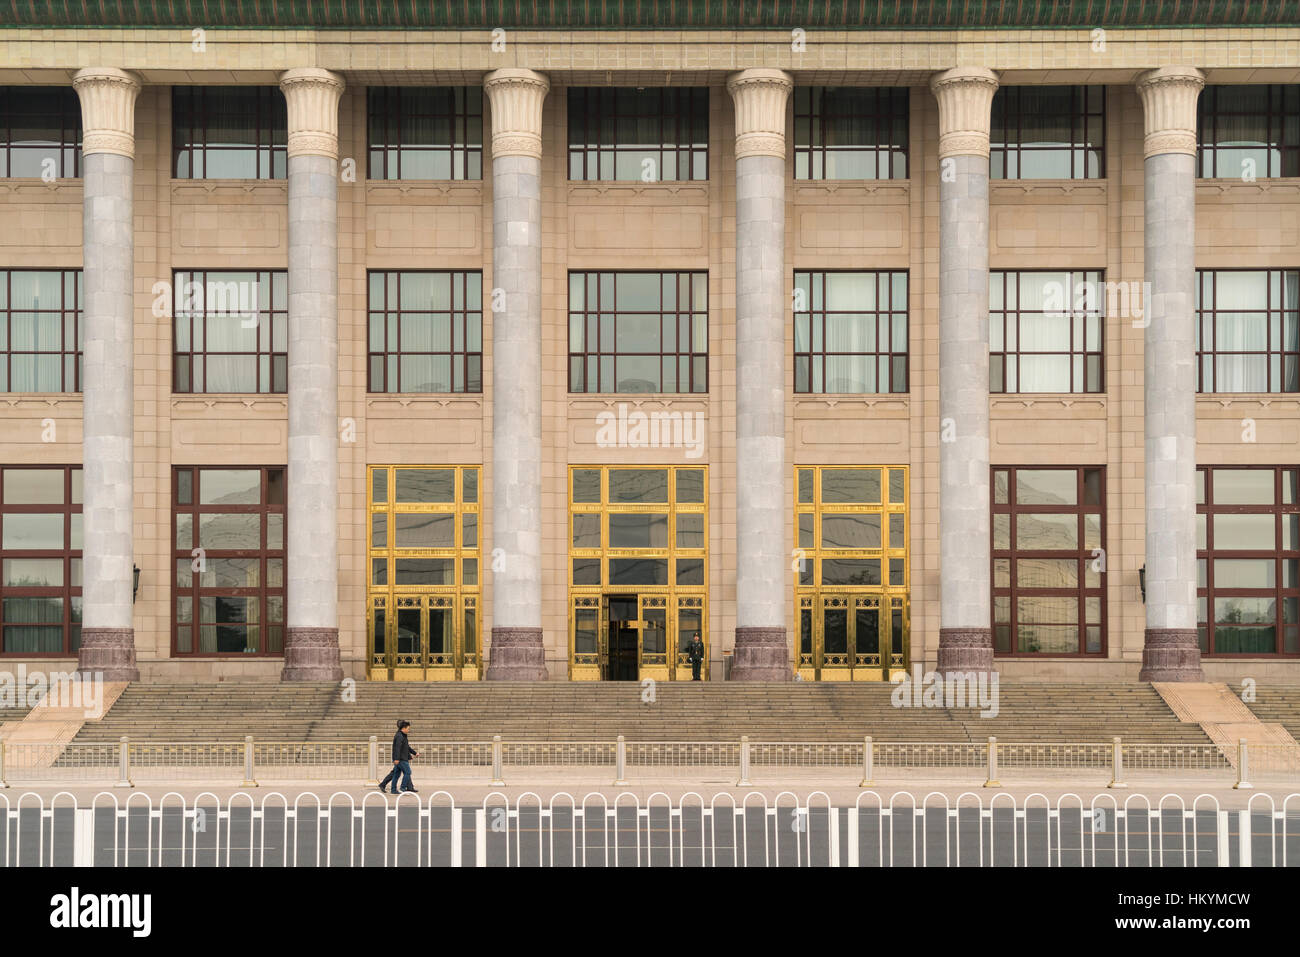 Great Hall of the People, Beijing, People's Republic of China, Asia Stock Photo